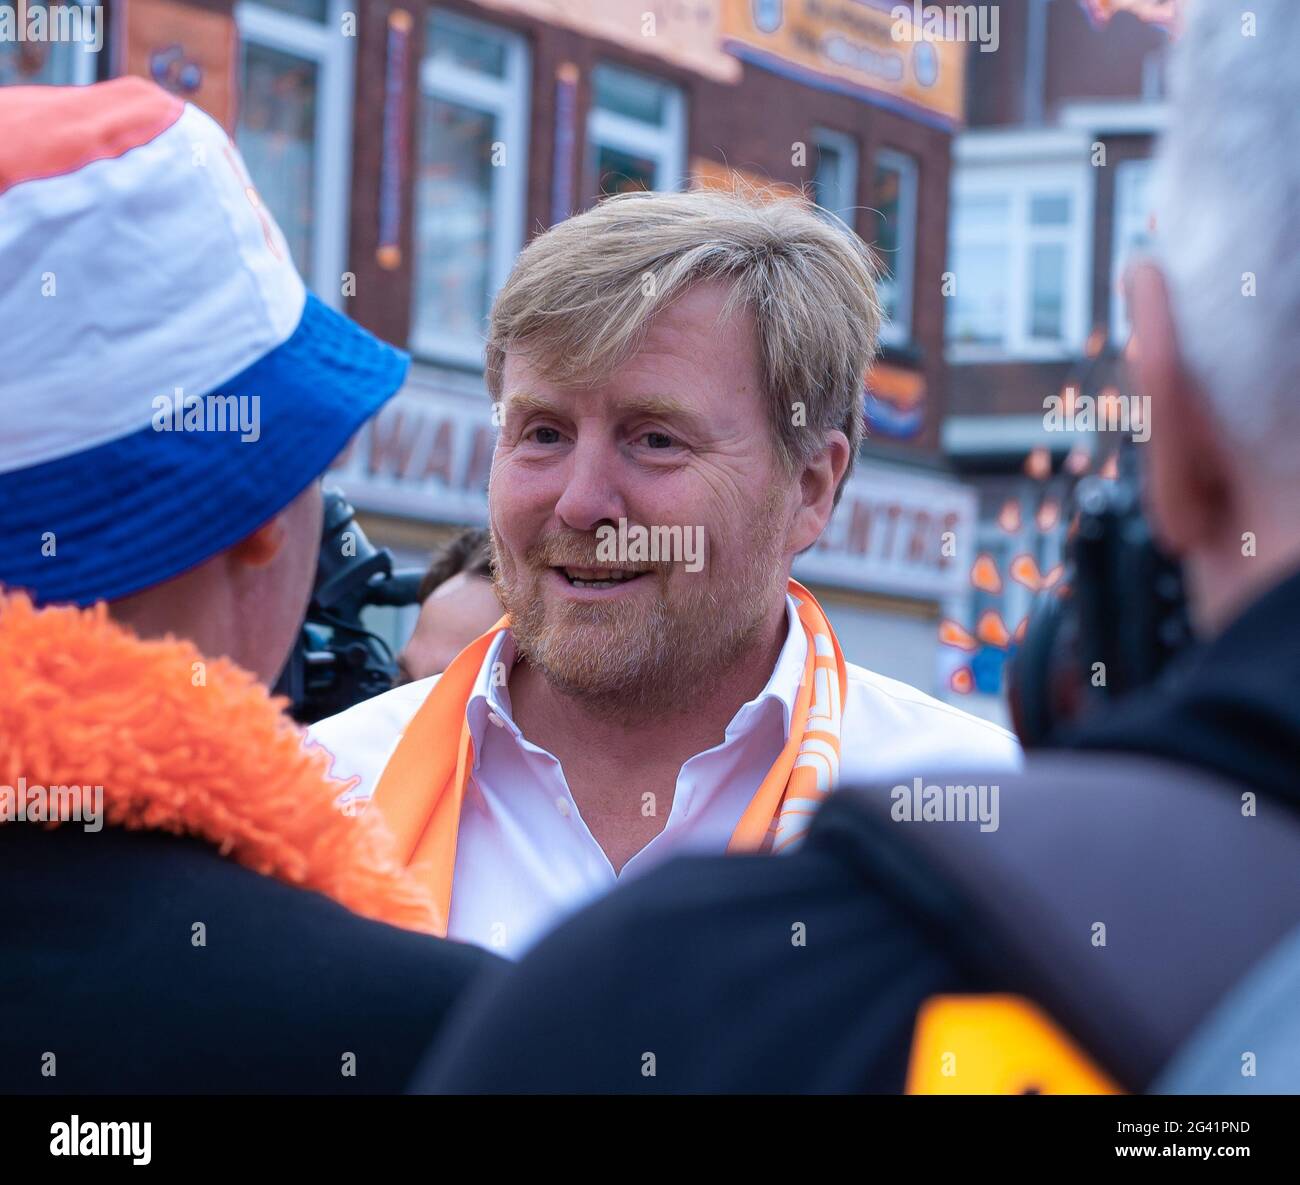 Oranjestraat, Marktweg, The Hague, The Netherlands. Thursday 17th June, 2021. H.R.H King Willem-Alexander of The Netherlands, paid an impromptu visit to the resident of Marktweg; temporally named ‘Oranjestraat - Orange Street' having been recently nominated the winner of: ‘The Most Beautiful Street in The Netherlands'. The King's visit caused quite a commotion, as H.R.H, arrived just prior to the start Holland's next round in ‘The European Championship Cup 2020. His R.H. took a brief (100 meter) walk and chatted to local residents, and ended his brief visit to a corner house, that welcomed fa Stock Photo